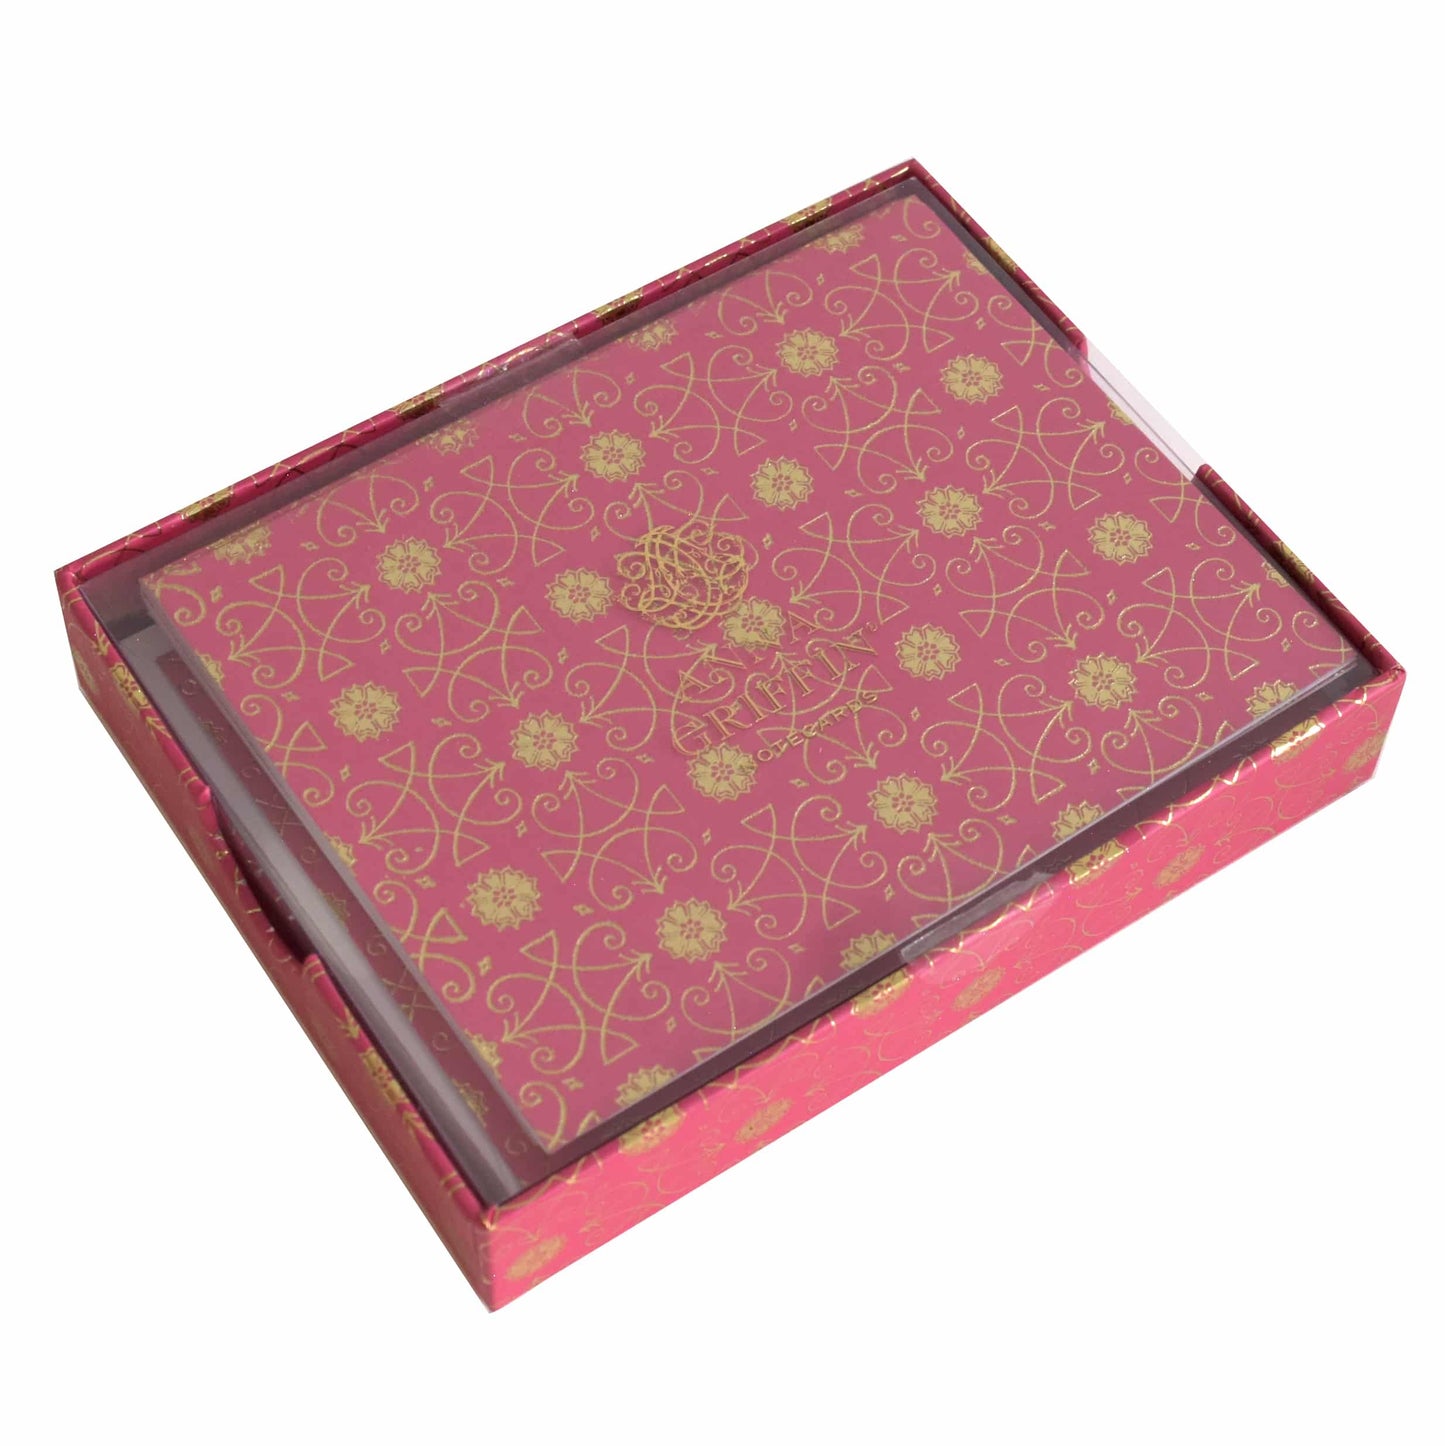 a pink box with gold designs on it.